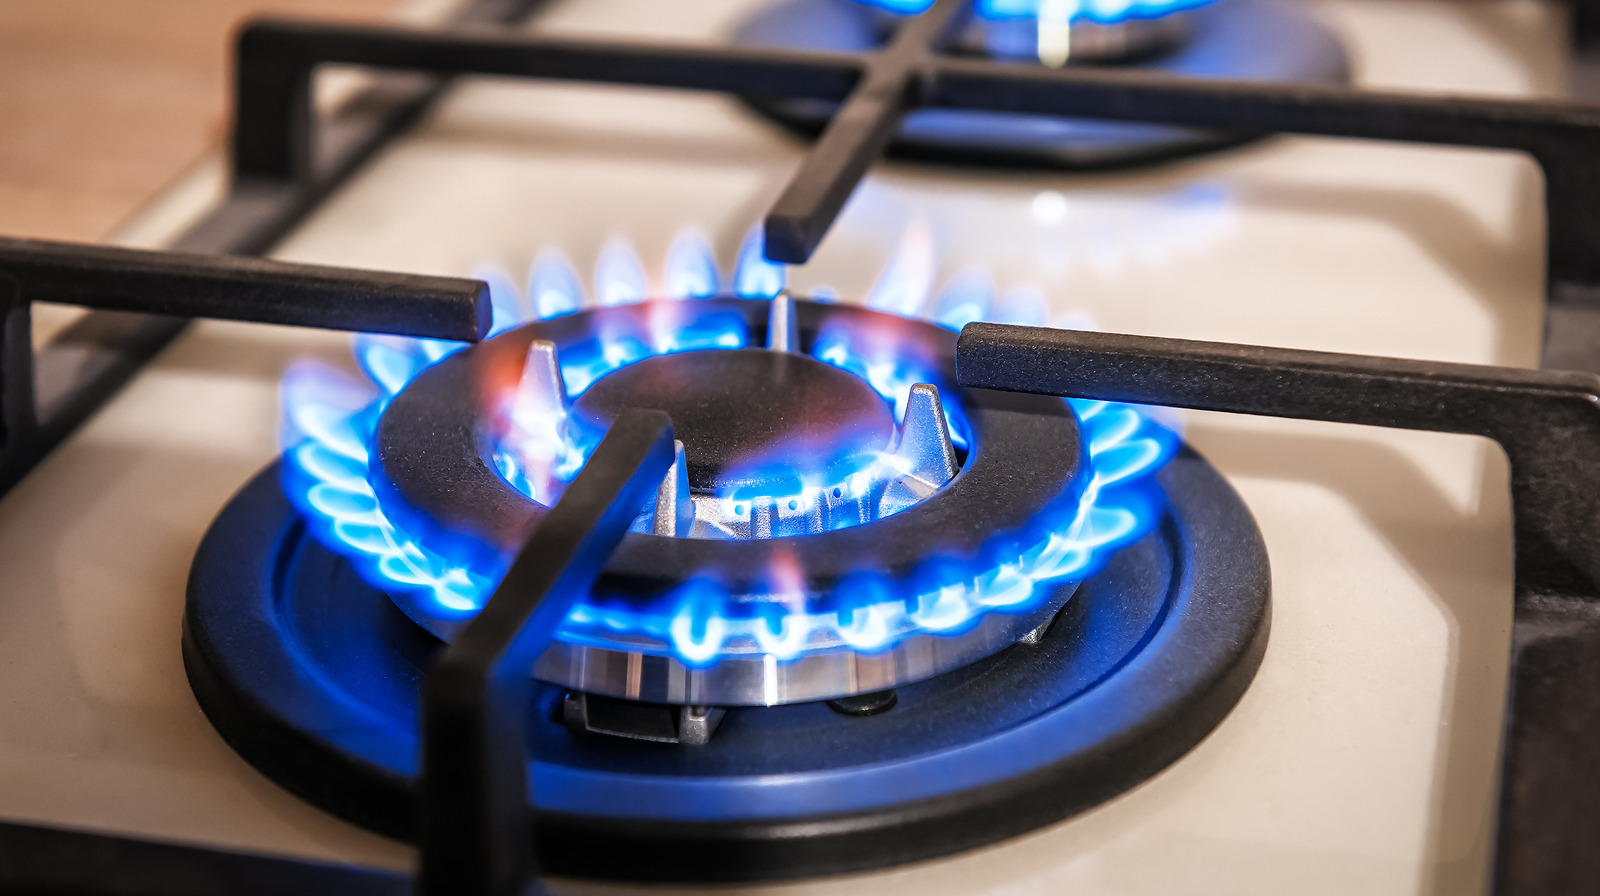 Is It Safe to Use Gas Stove For Heat?